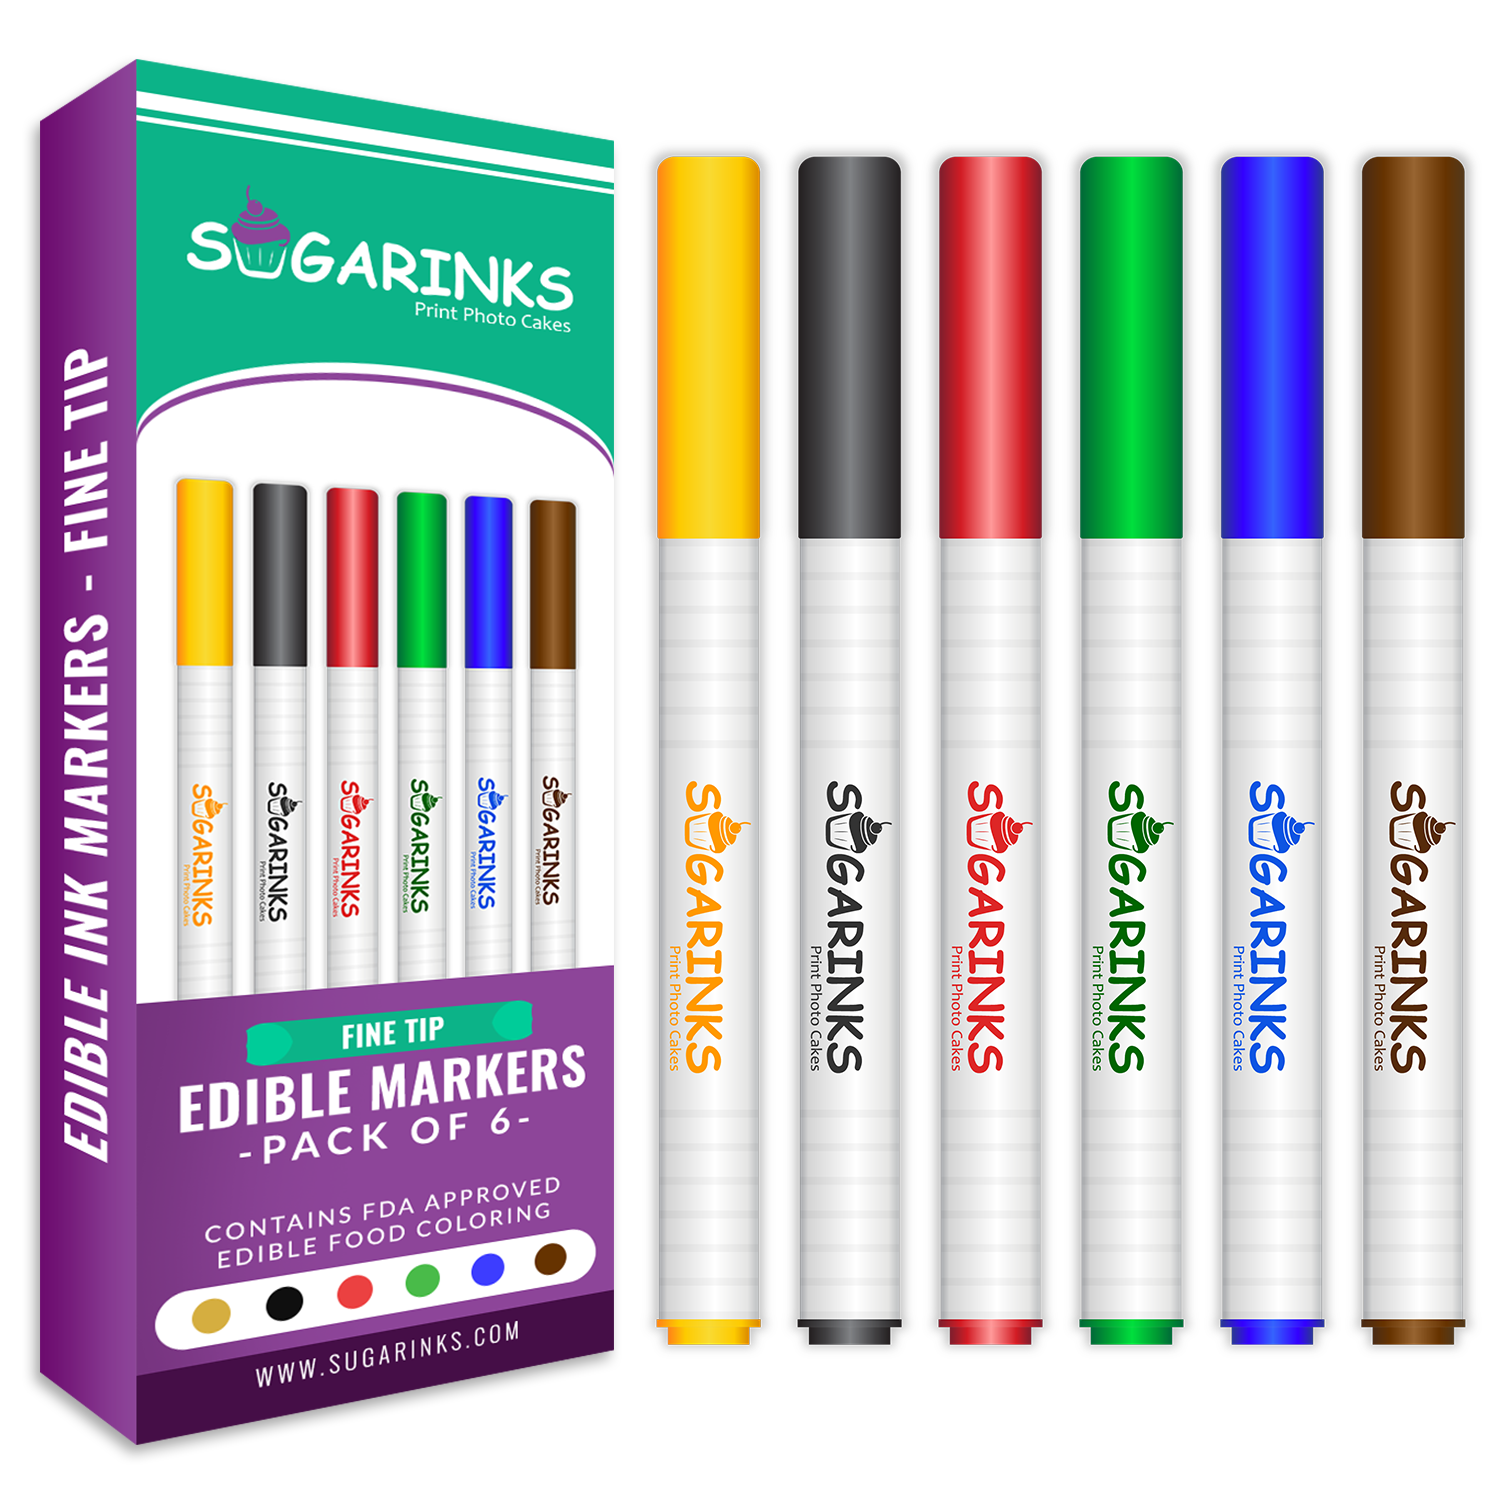 Sugarinks Edible Ink Pen Fine Tip Pack of 6 for Cake, Cookie, and Cupcake Edible Art -  Black, Green, Yellow, Blue, Brown, and Red